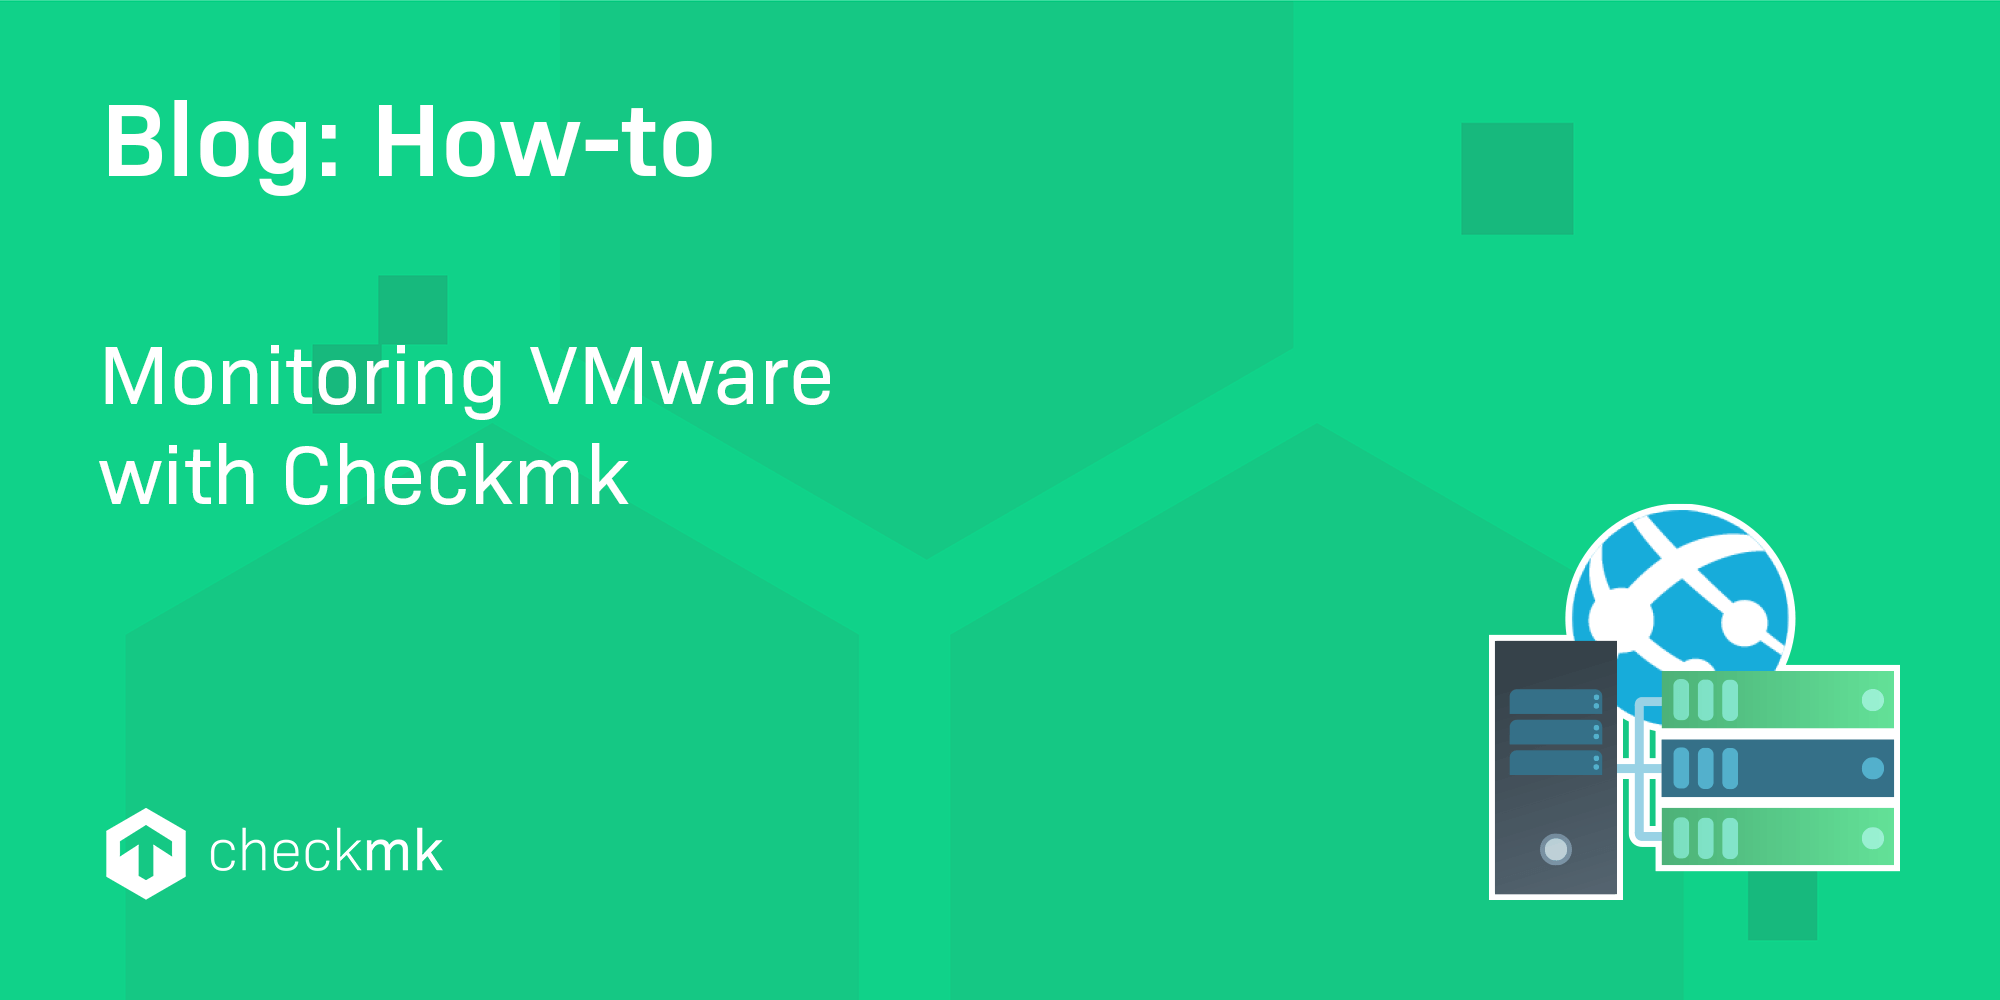 Monitoring VMware can quickly become a nightmare with an inappropriate monitoring solution. When not automated, the adding and management of VMs in yo